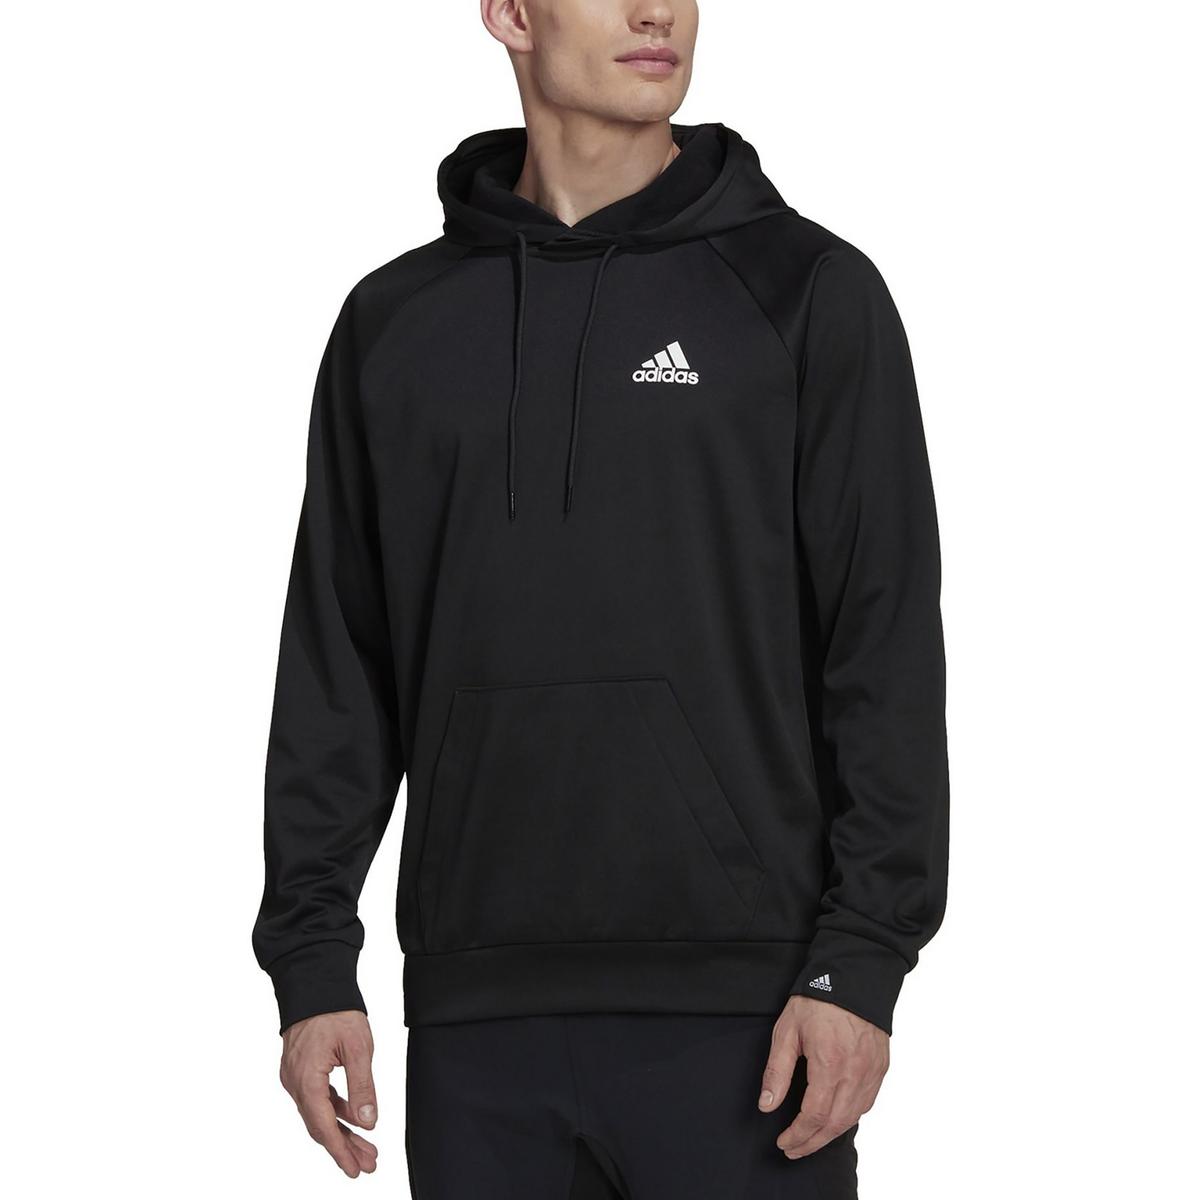 Adidas Mens Fitness Workout Hoodie